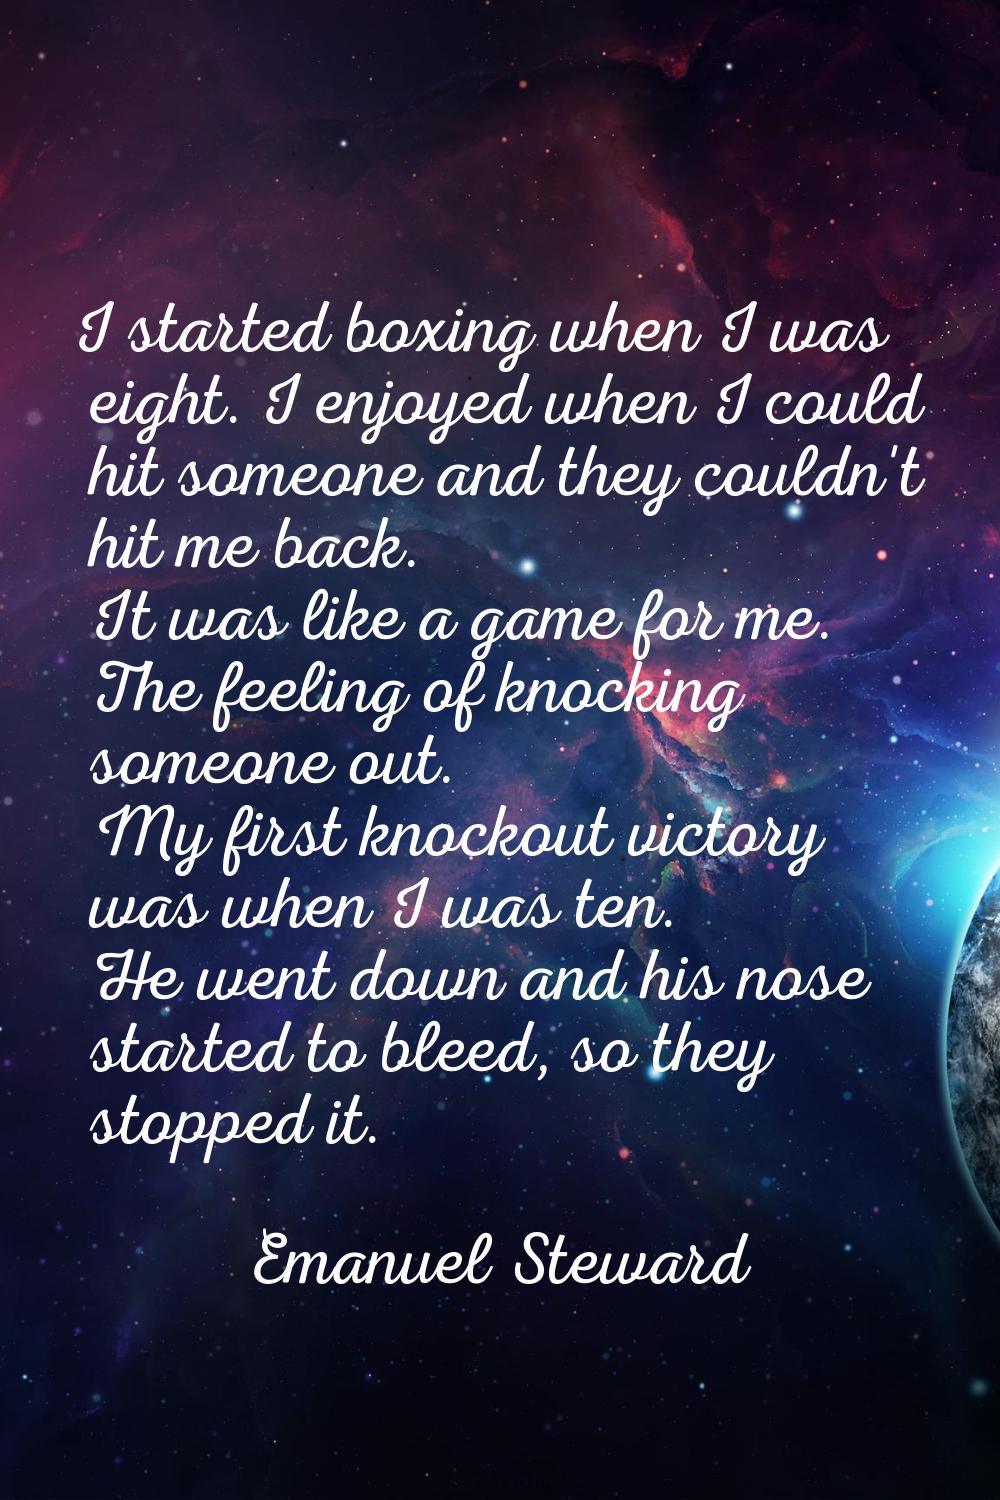 I started boxing when I was eight. I enjoyed when I could hit someone and they couldn't hit me back